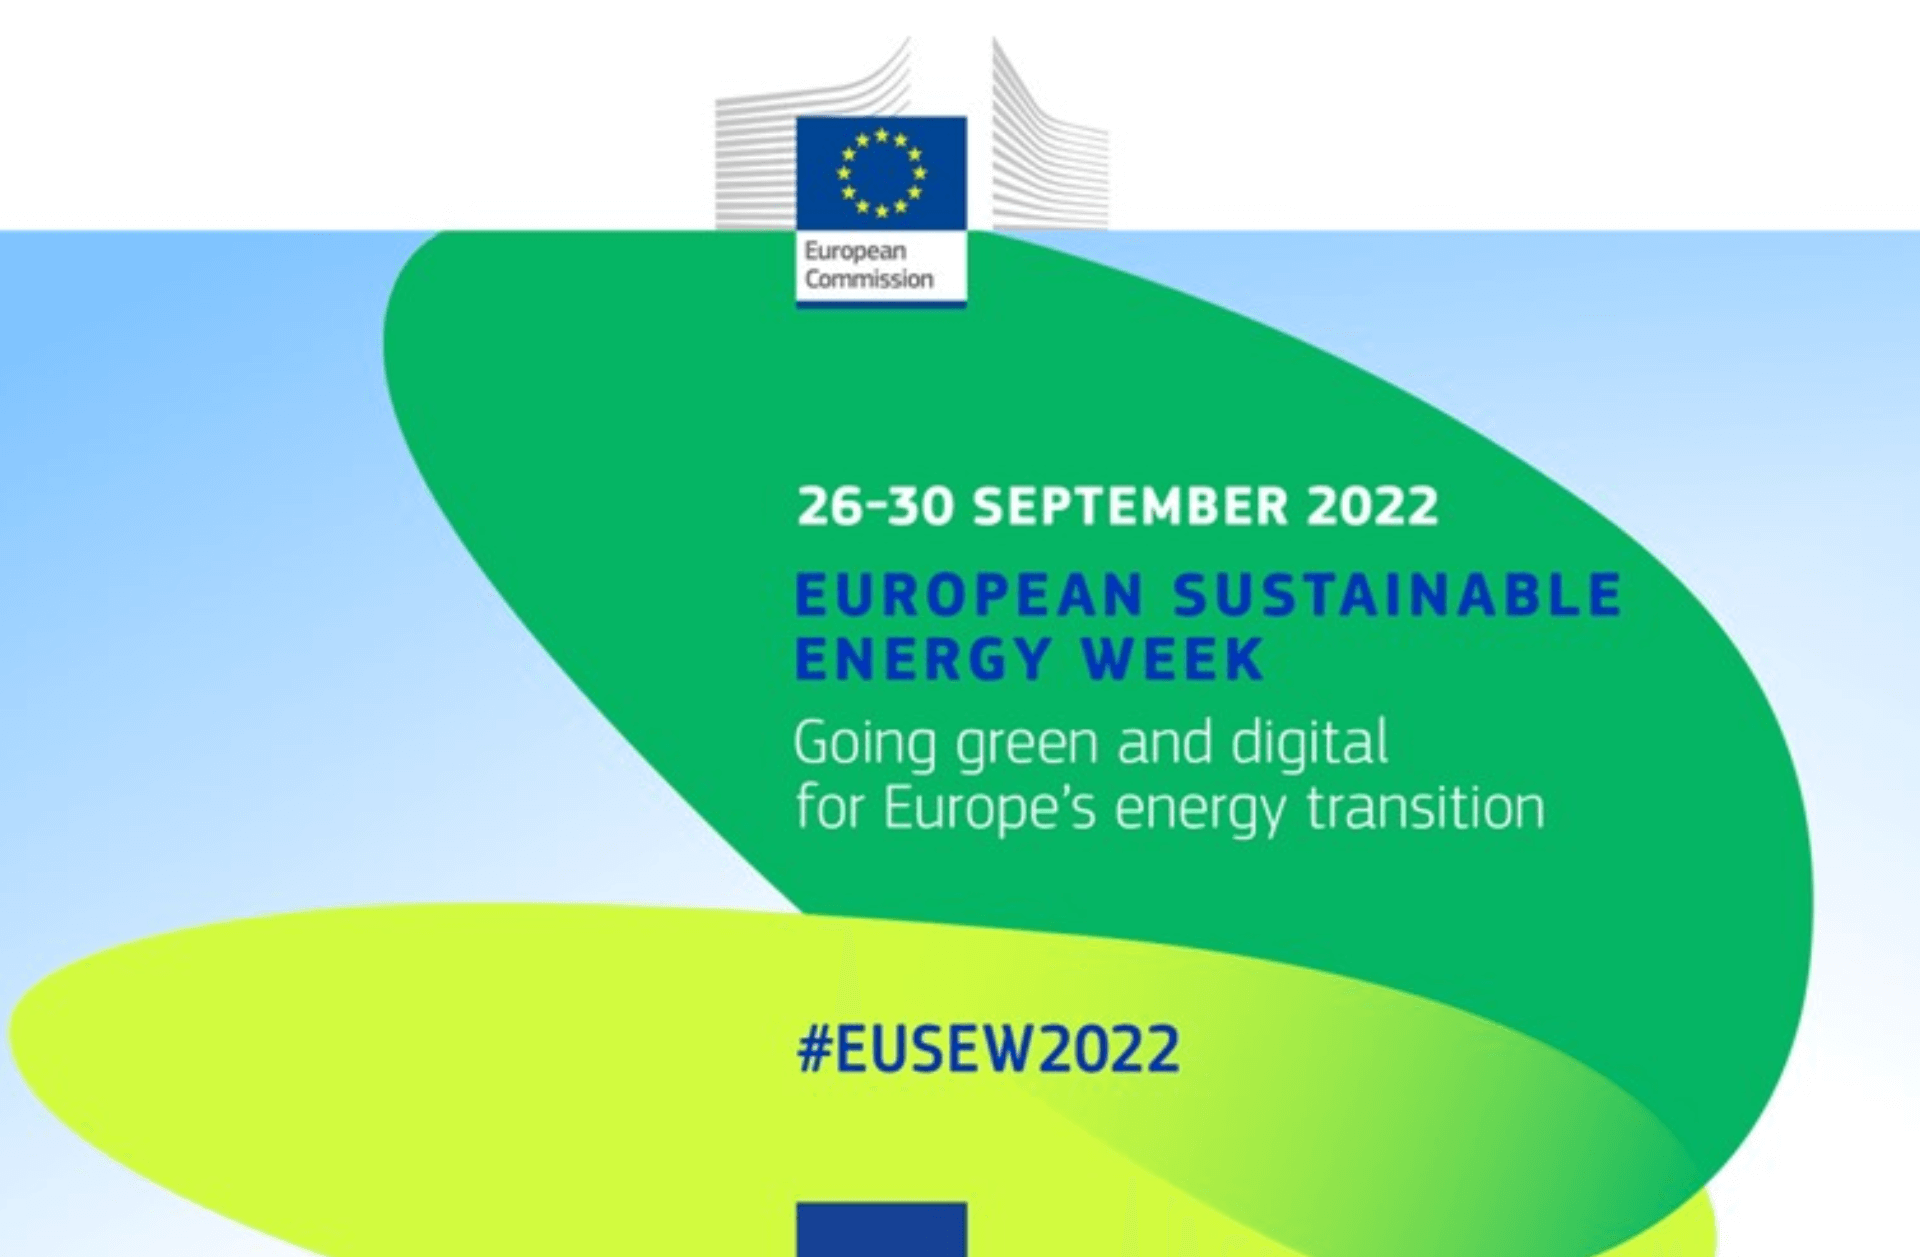 See you at #EUSEW2022: Join our policy session on 28 September 2022